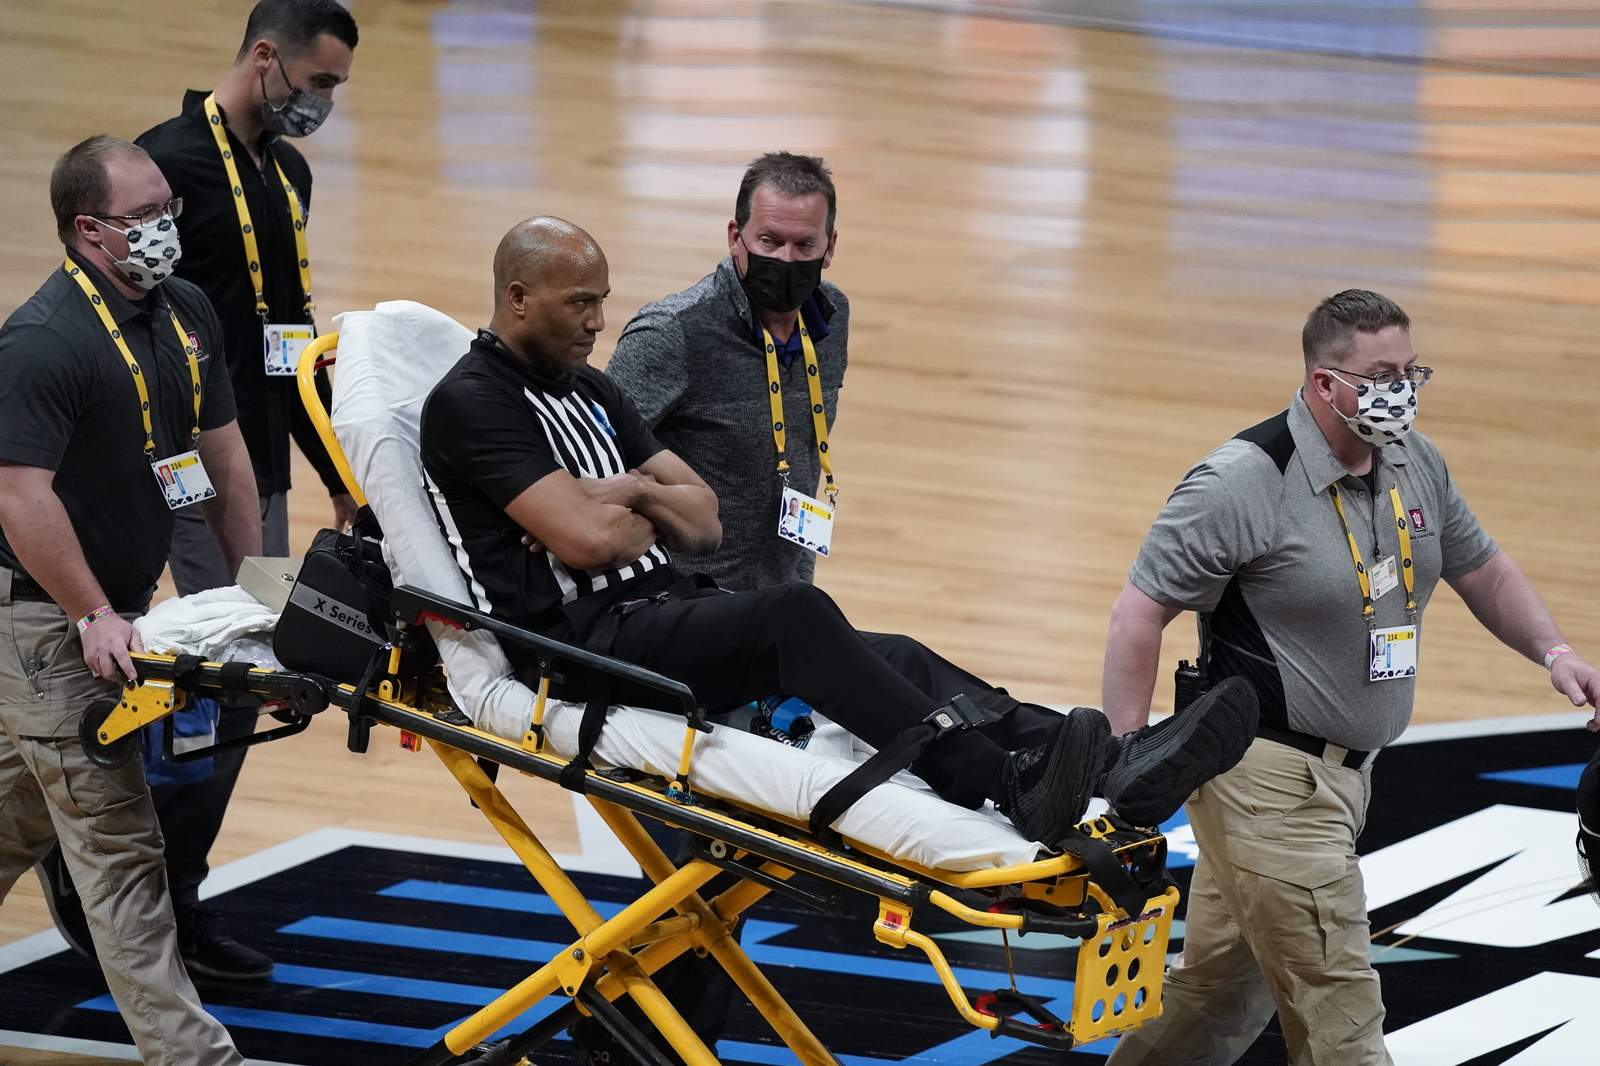 Official collapses, wheeled off court on stretcher